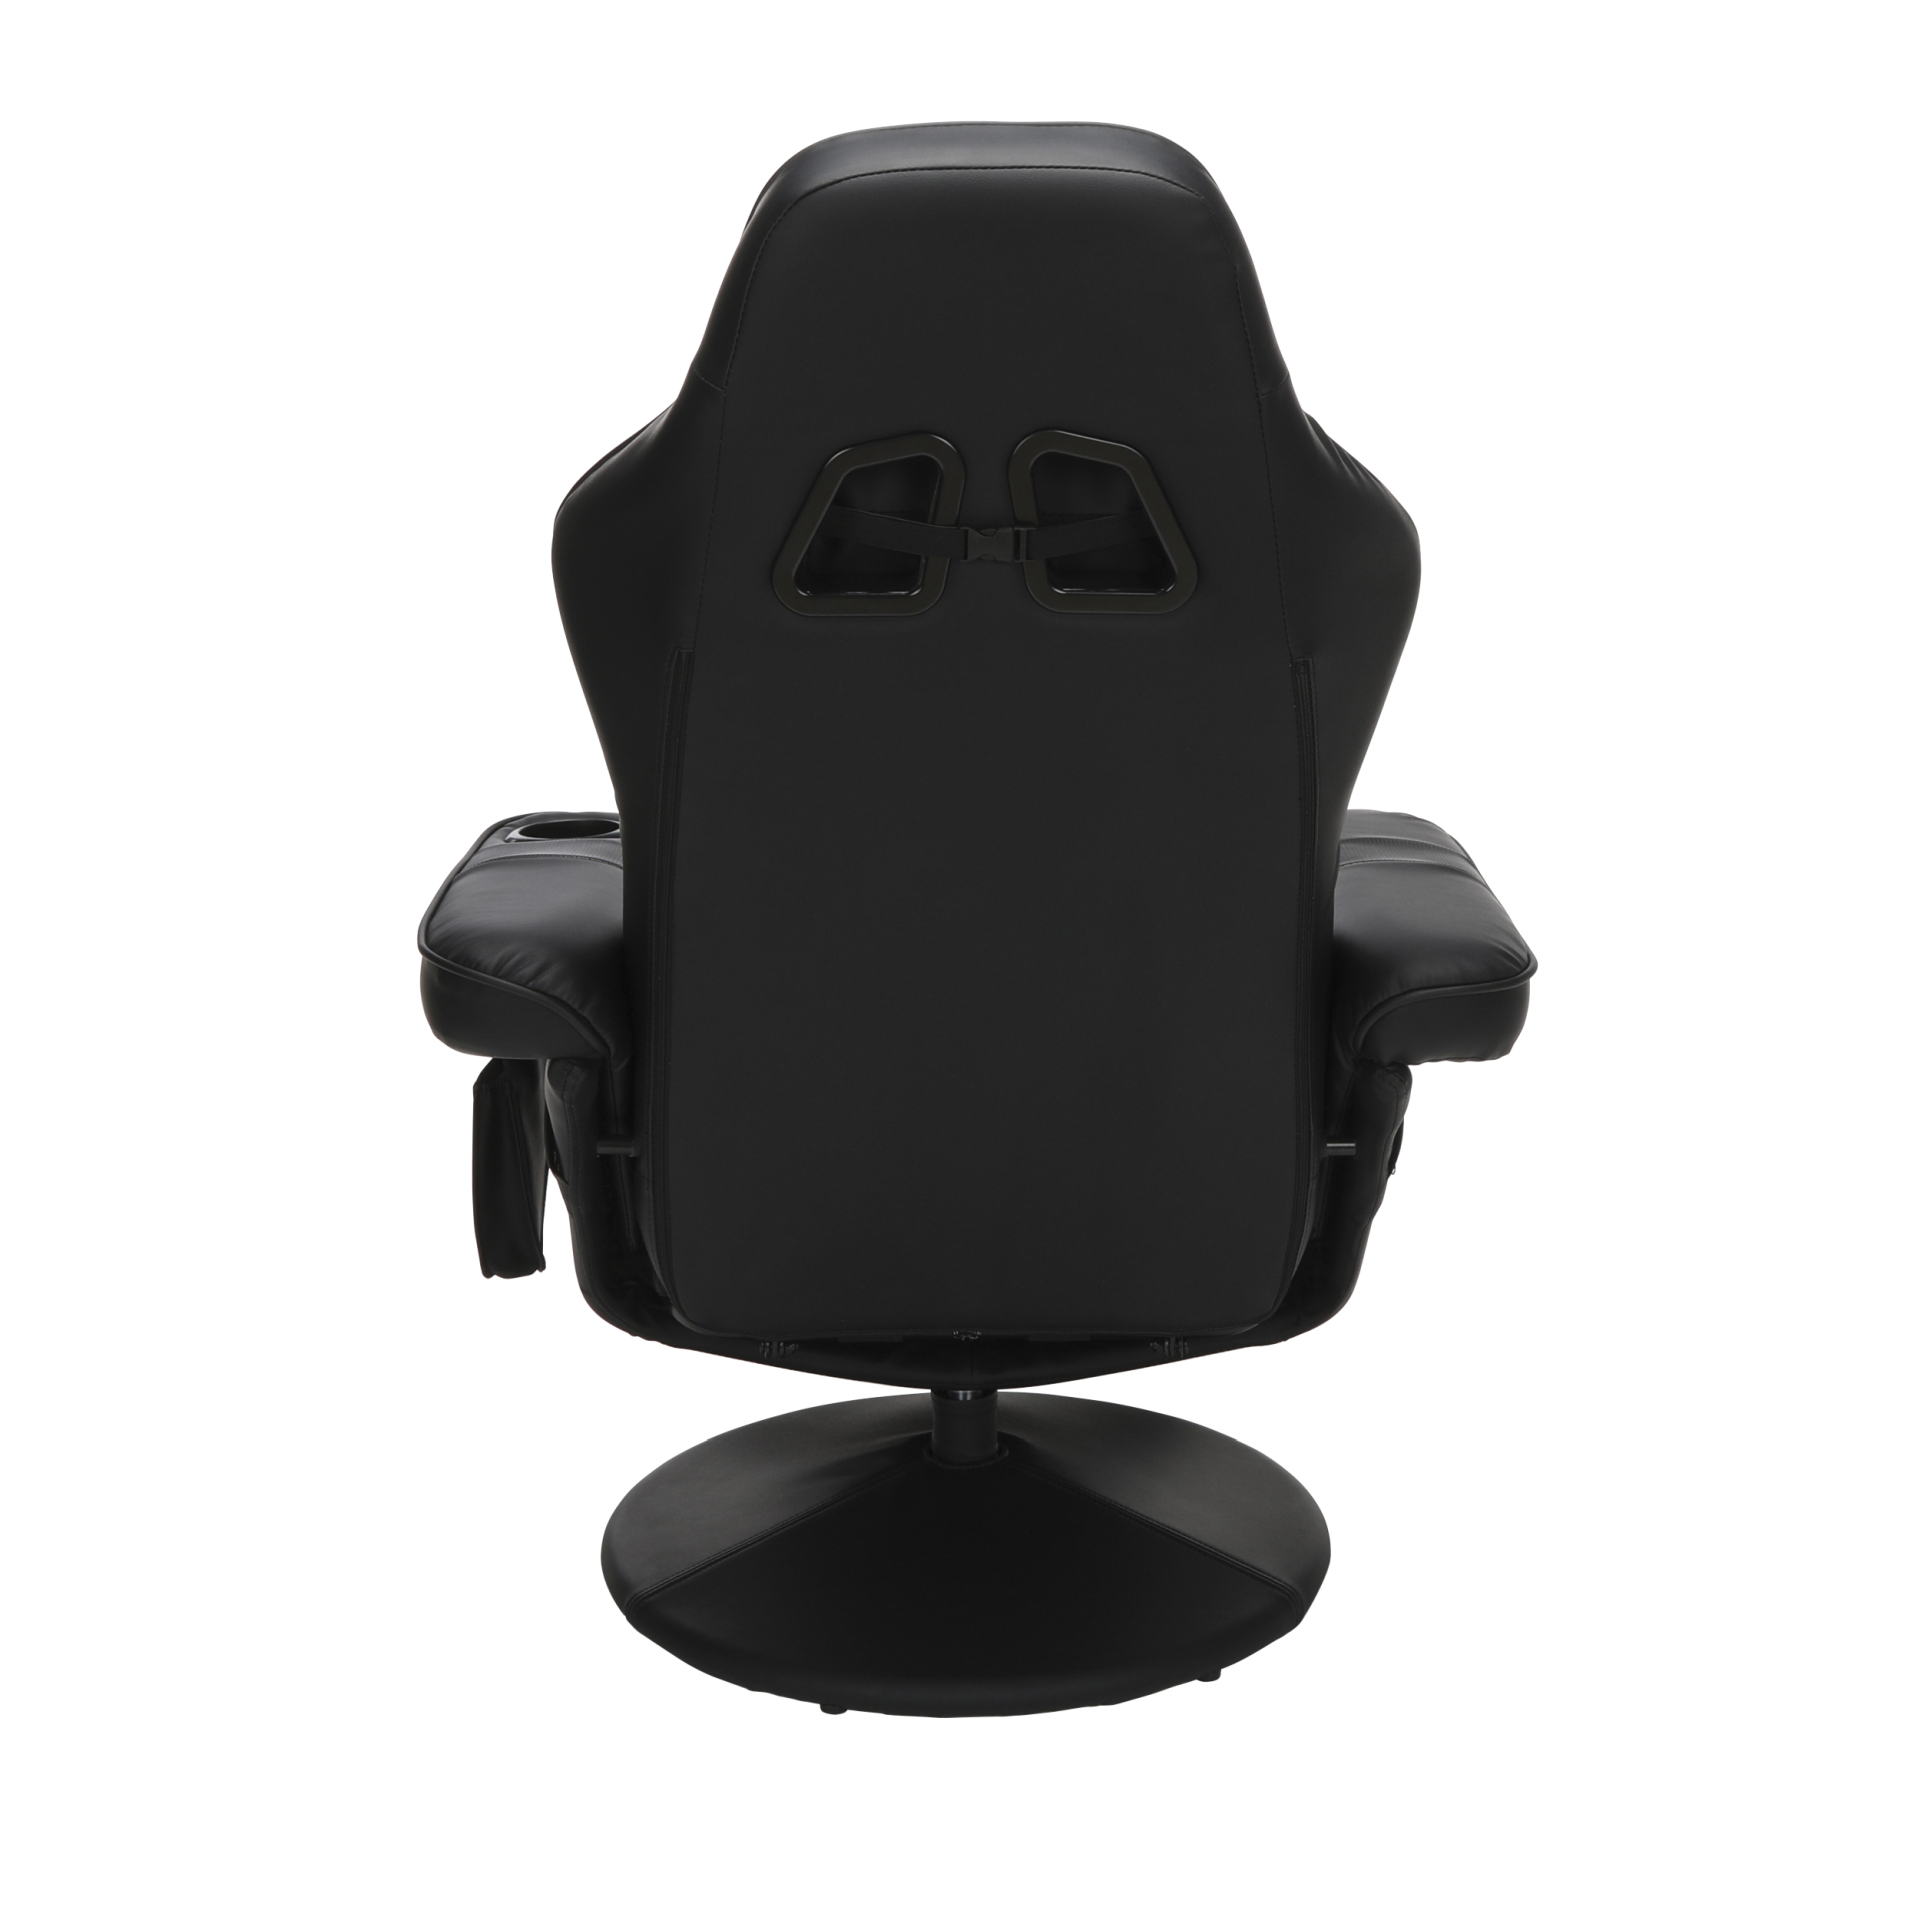 RESPAWN RSP-900 Gaming Recliner #4